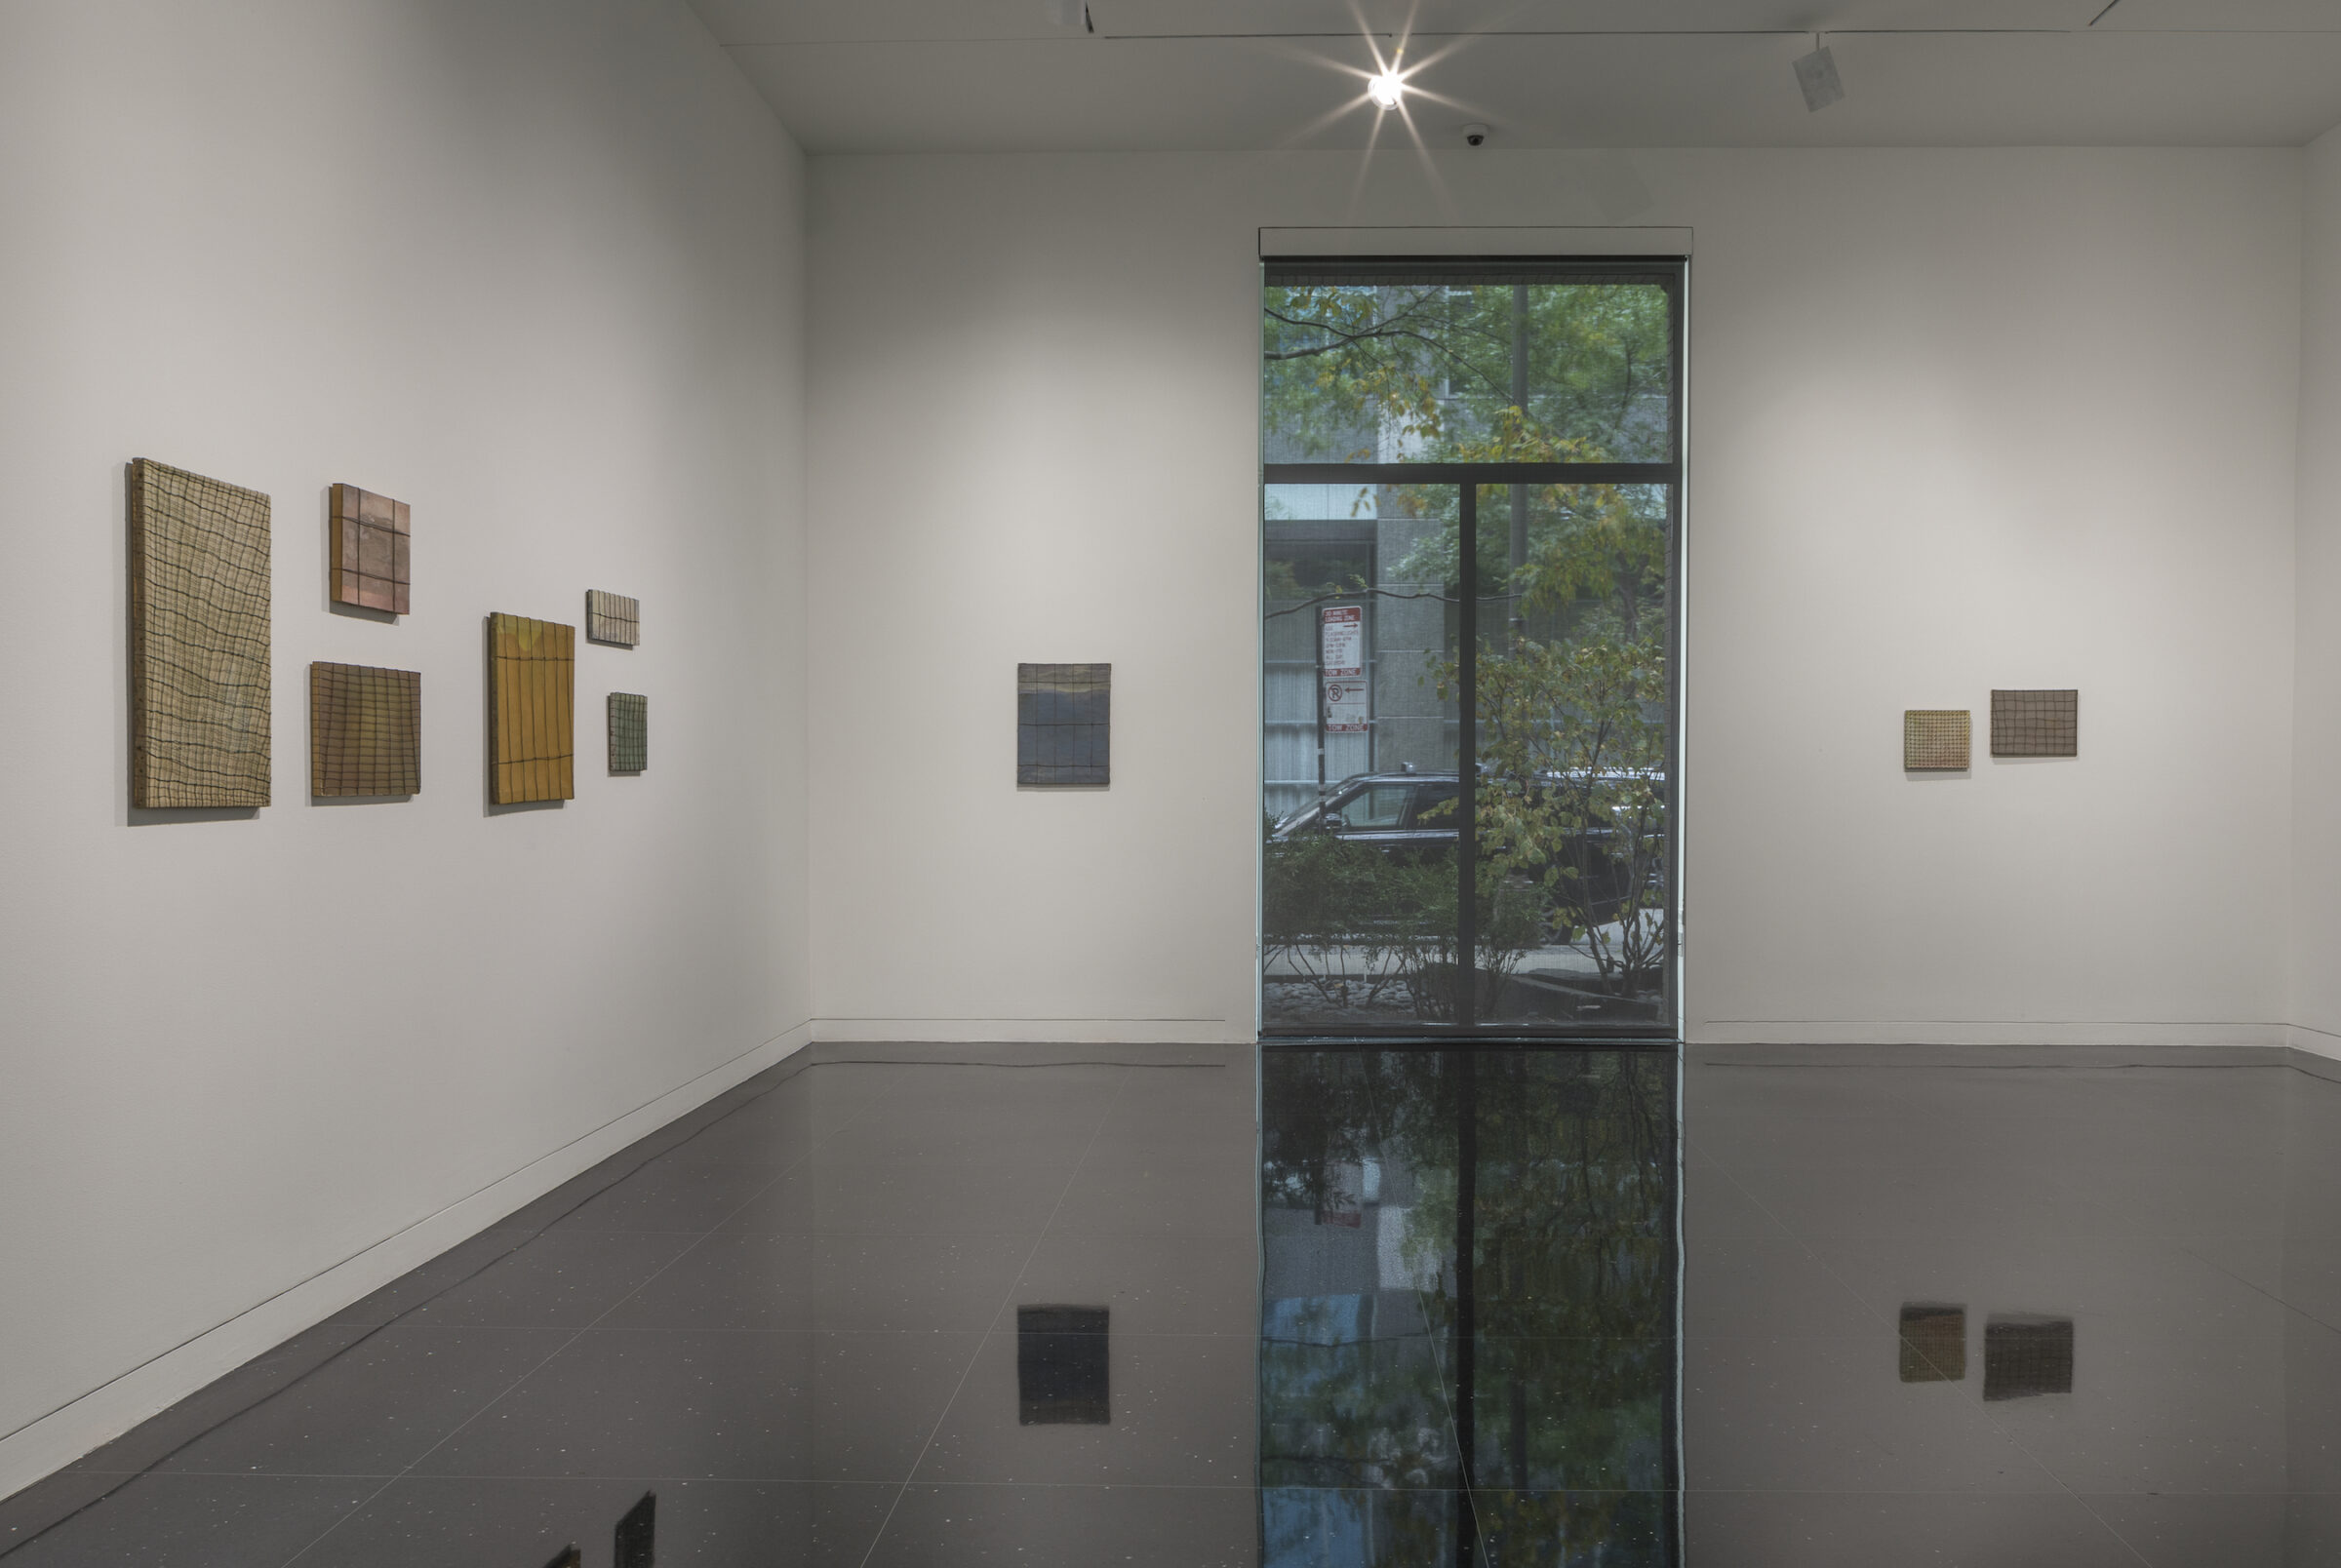 Installation view of a white walled gallery with two dimensional works of varying sizes arranged on the walls. Most works appear to have a wire grid laid over the canvas.